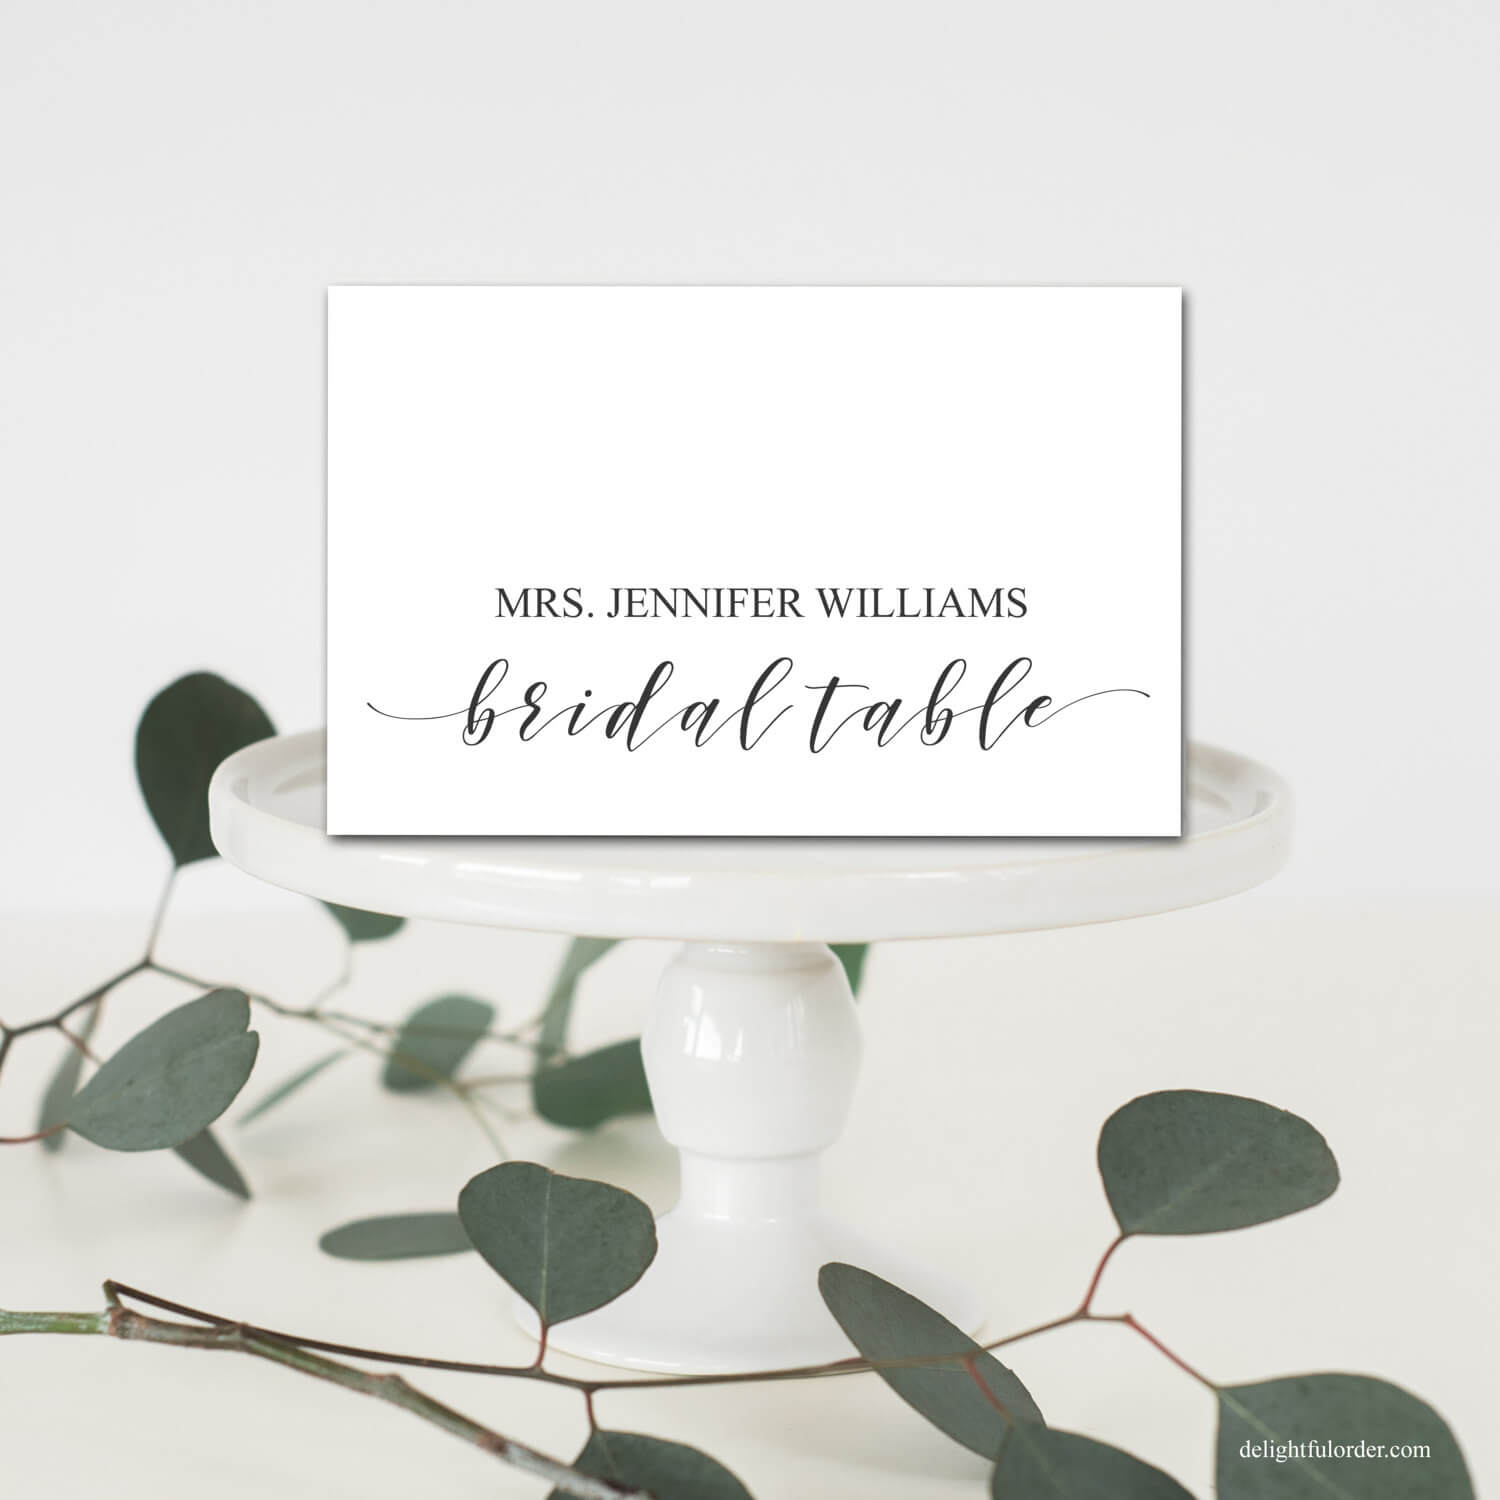 Editable Bridal Table Place Cards, Tent Fold Table Setting Name Cards,  Wedding Table Place Setting, Template, Diy Wedding, Pdf, Printable Intended For Place Card Setting Template